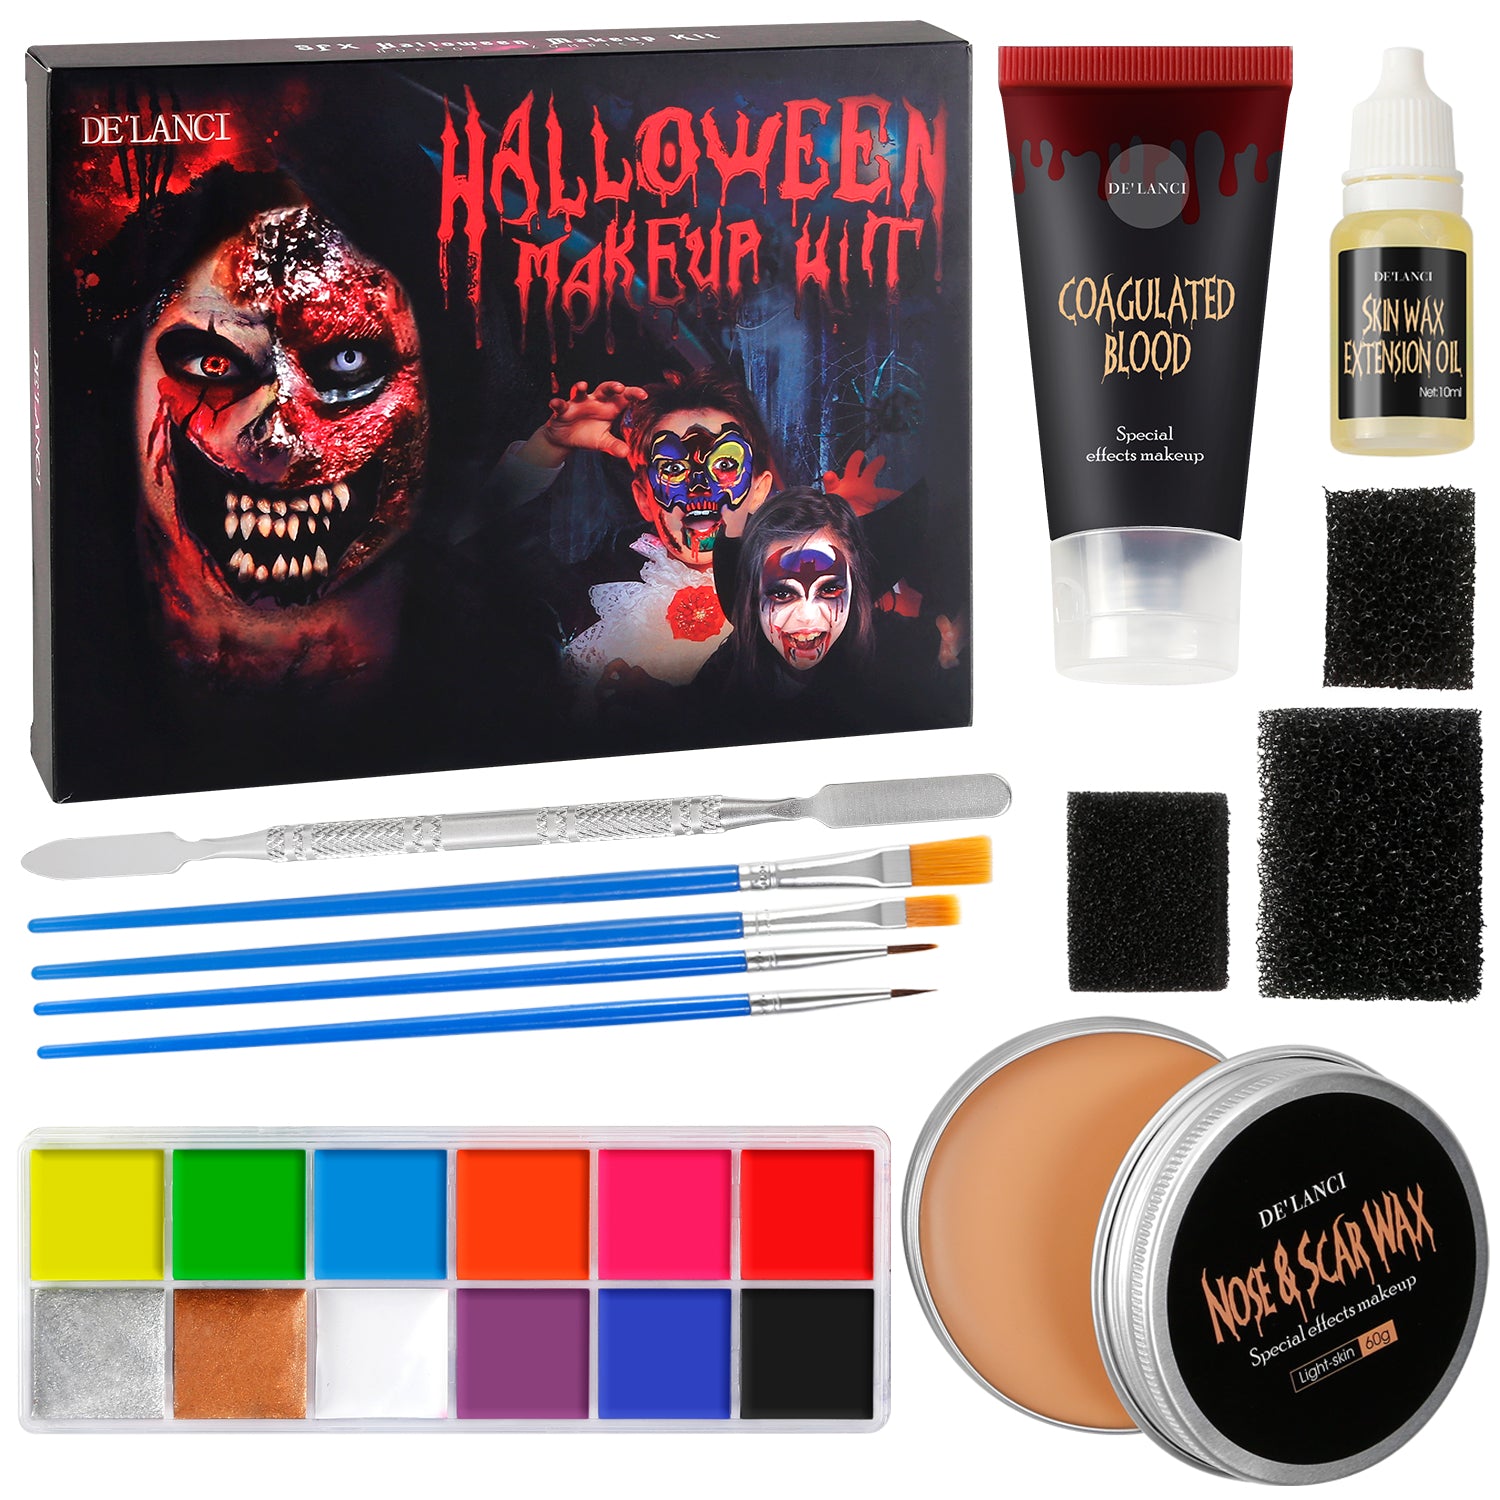 Special Effects Makeup Kit